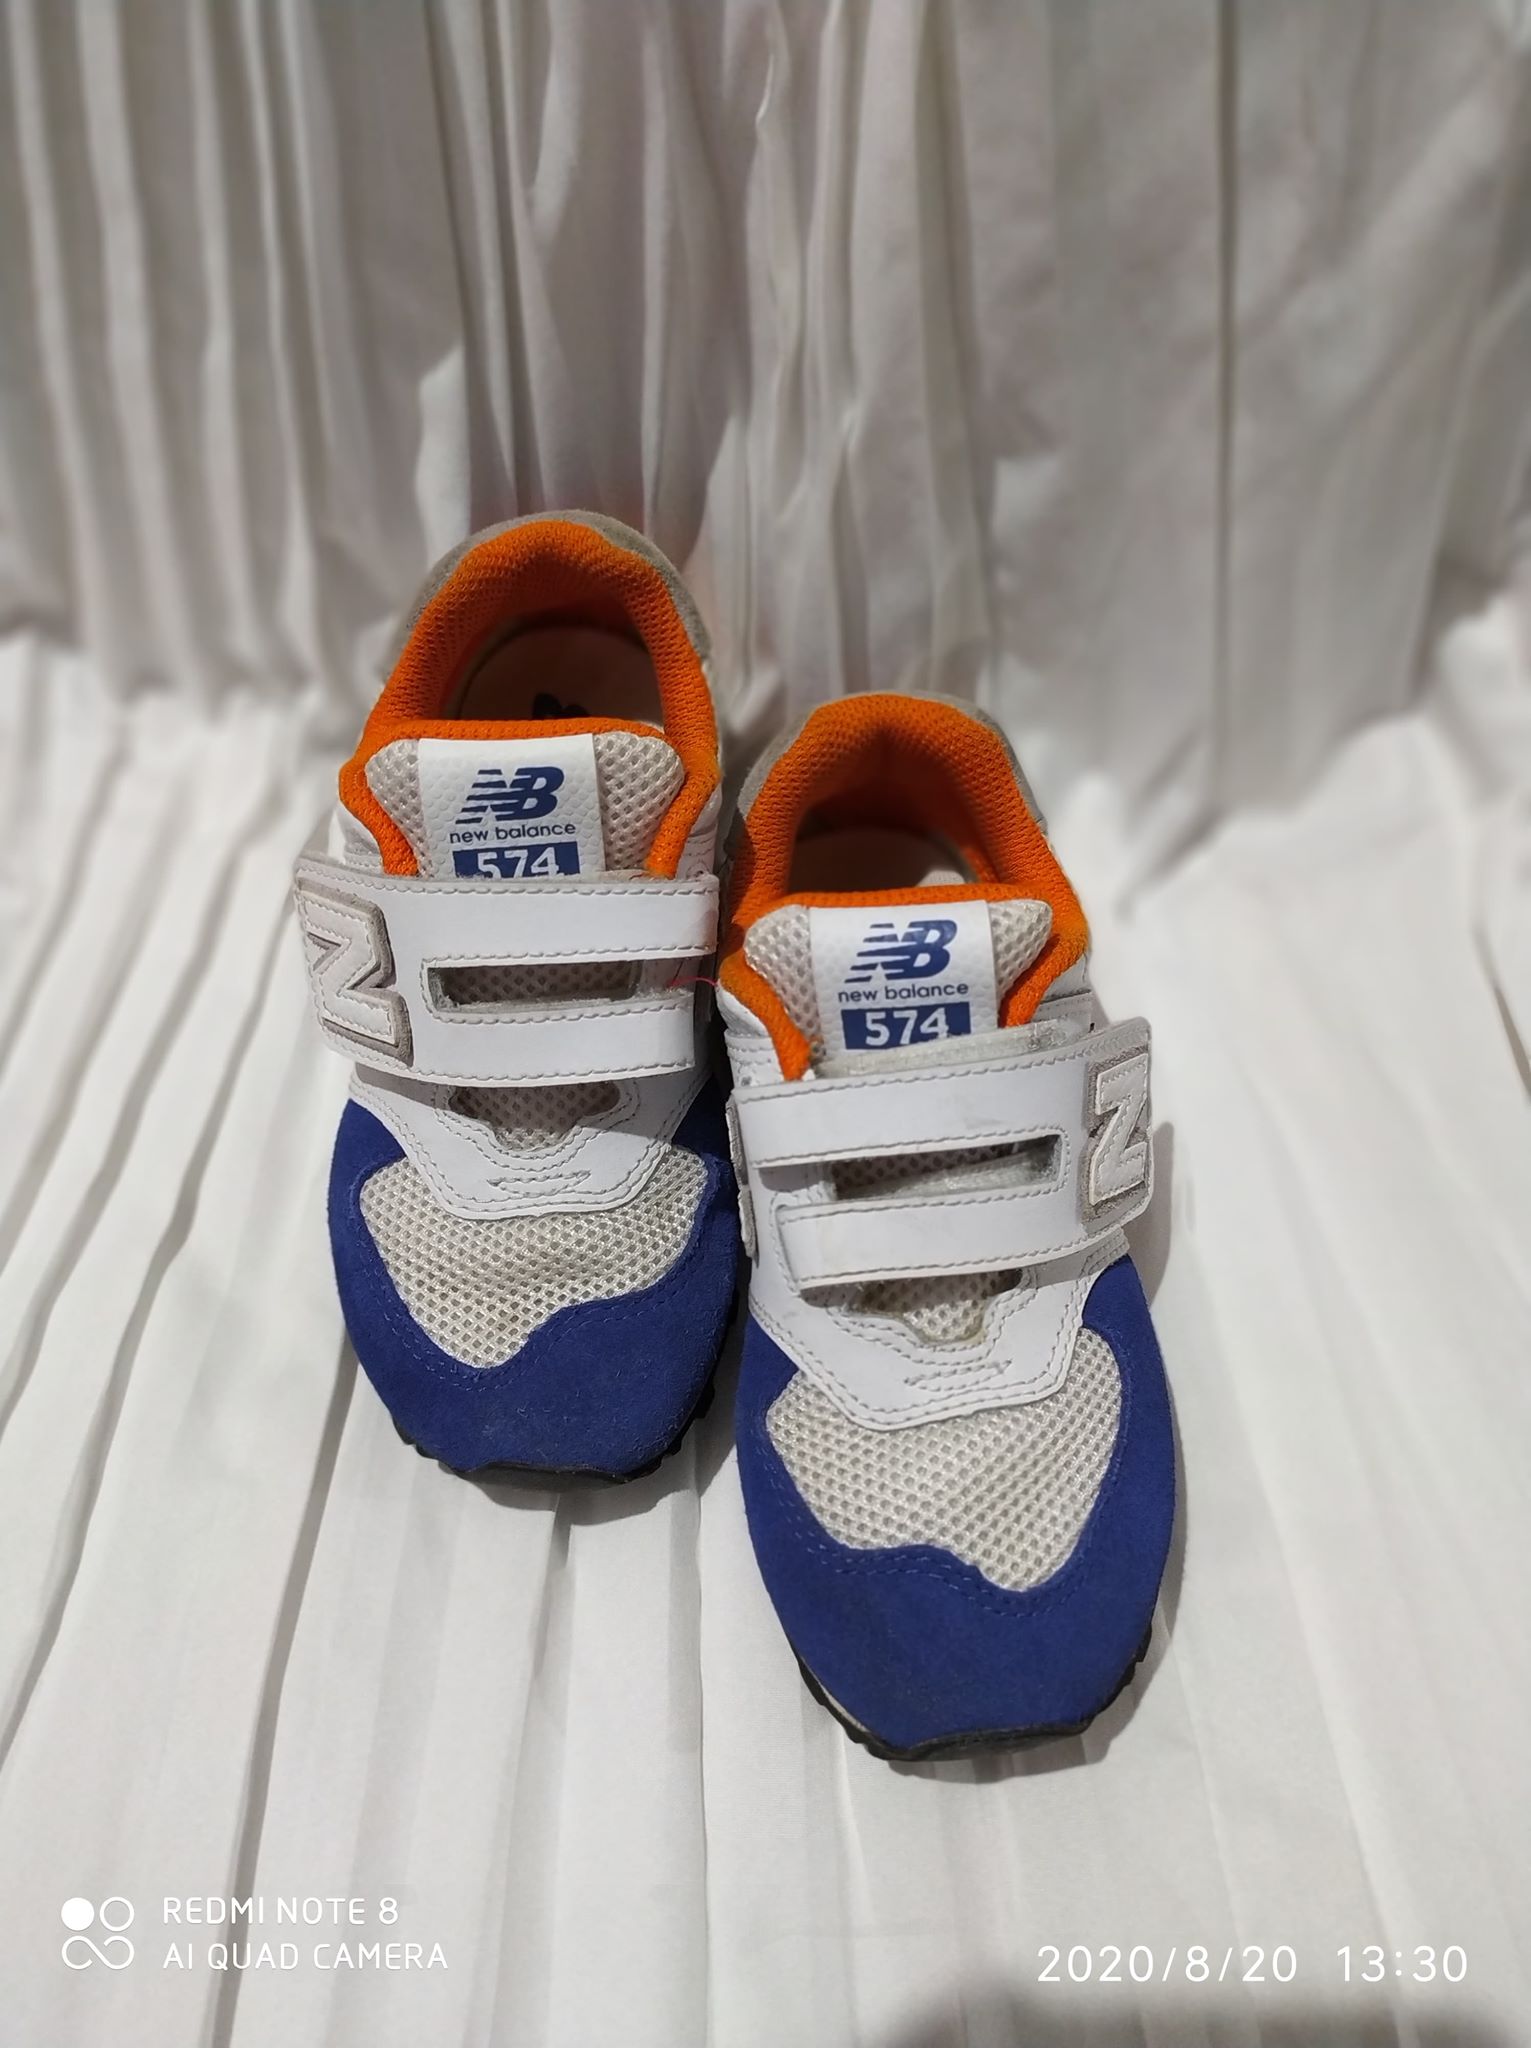 New Balance Kids Shoes: Buy sell online 